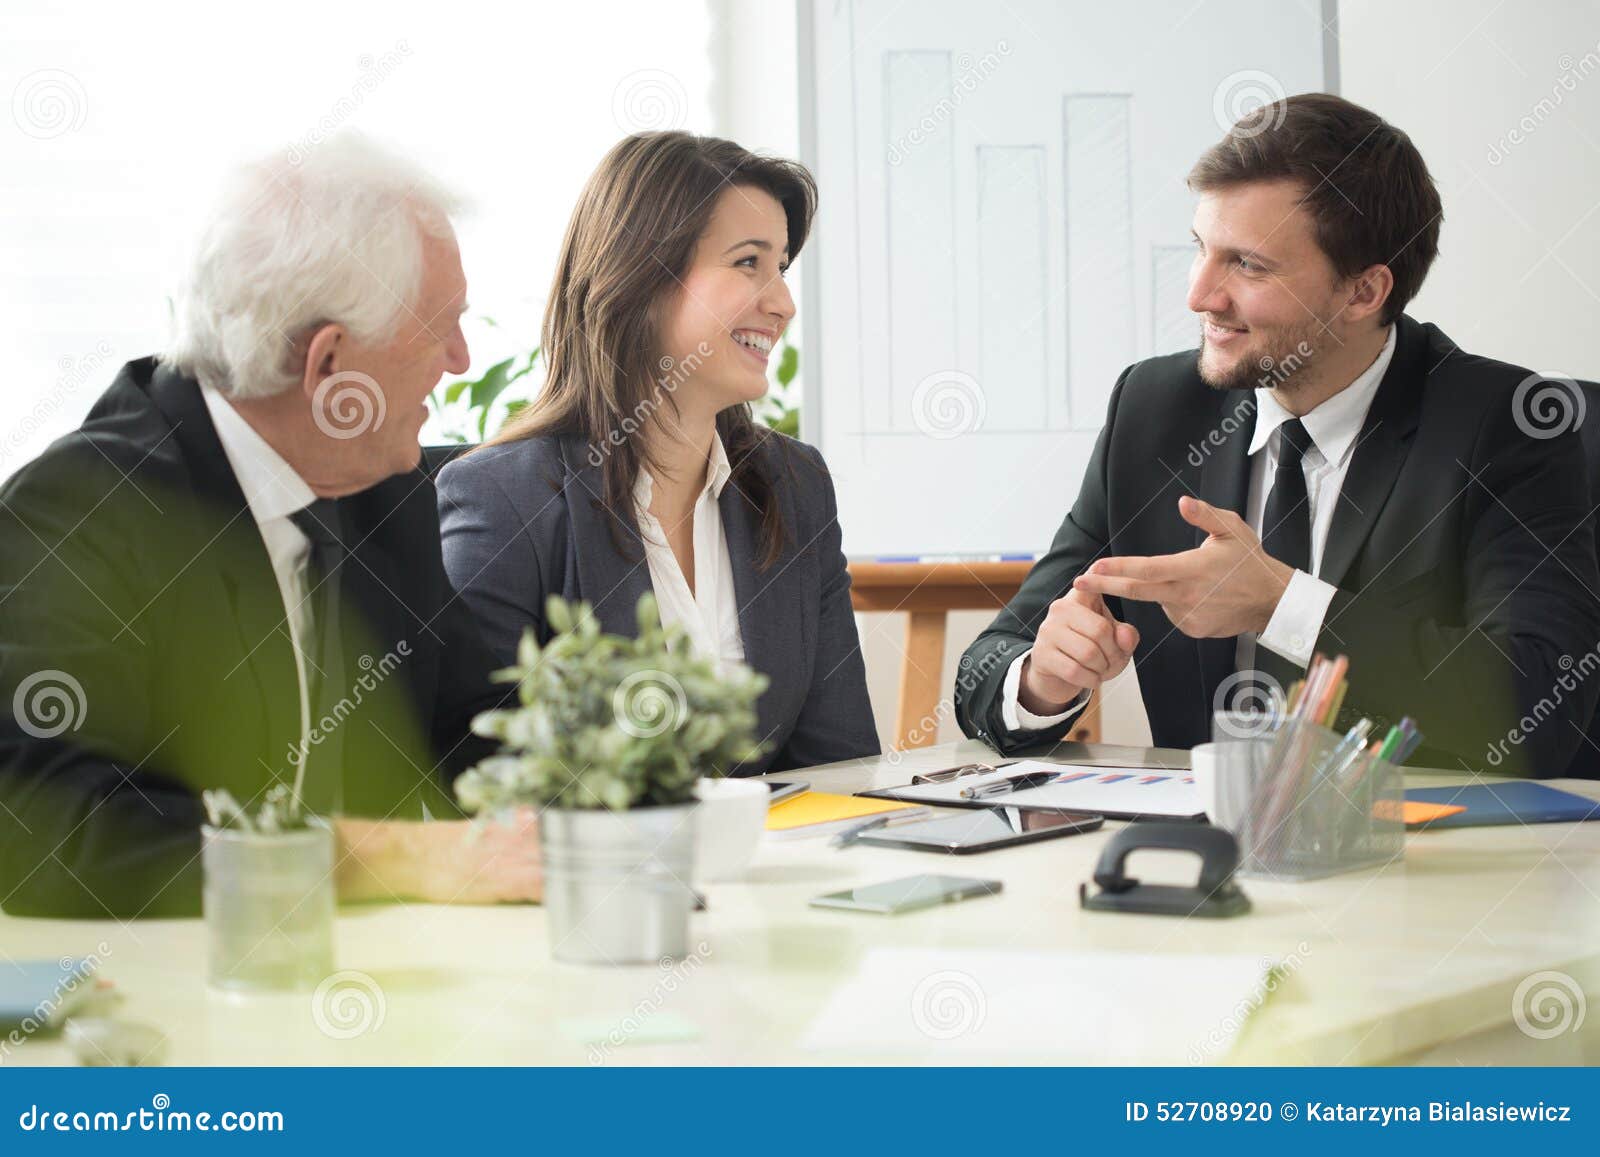 Young Boss Leading Business Conference Stock Photo - Image of agreement